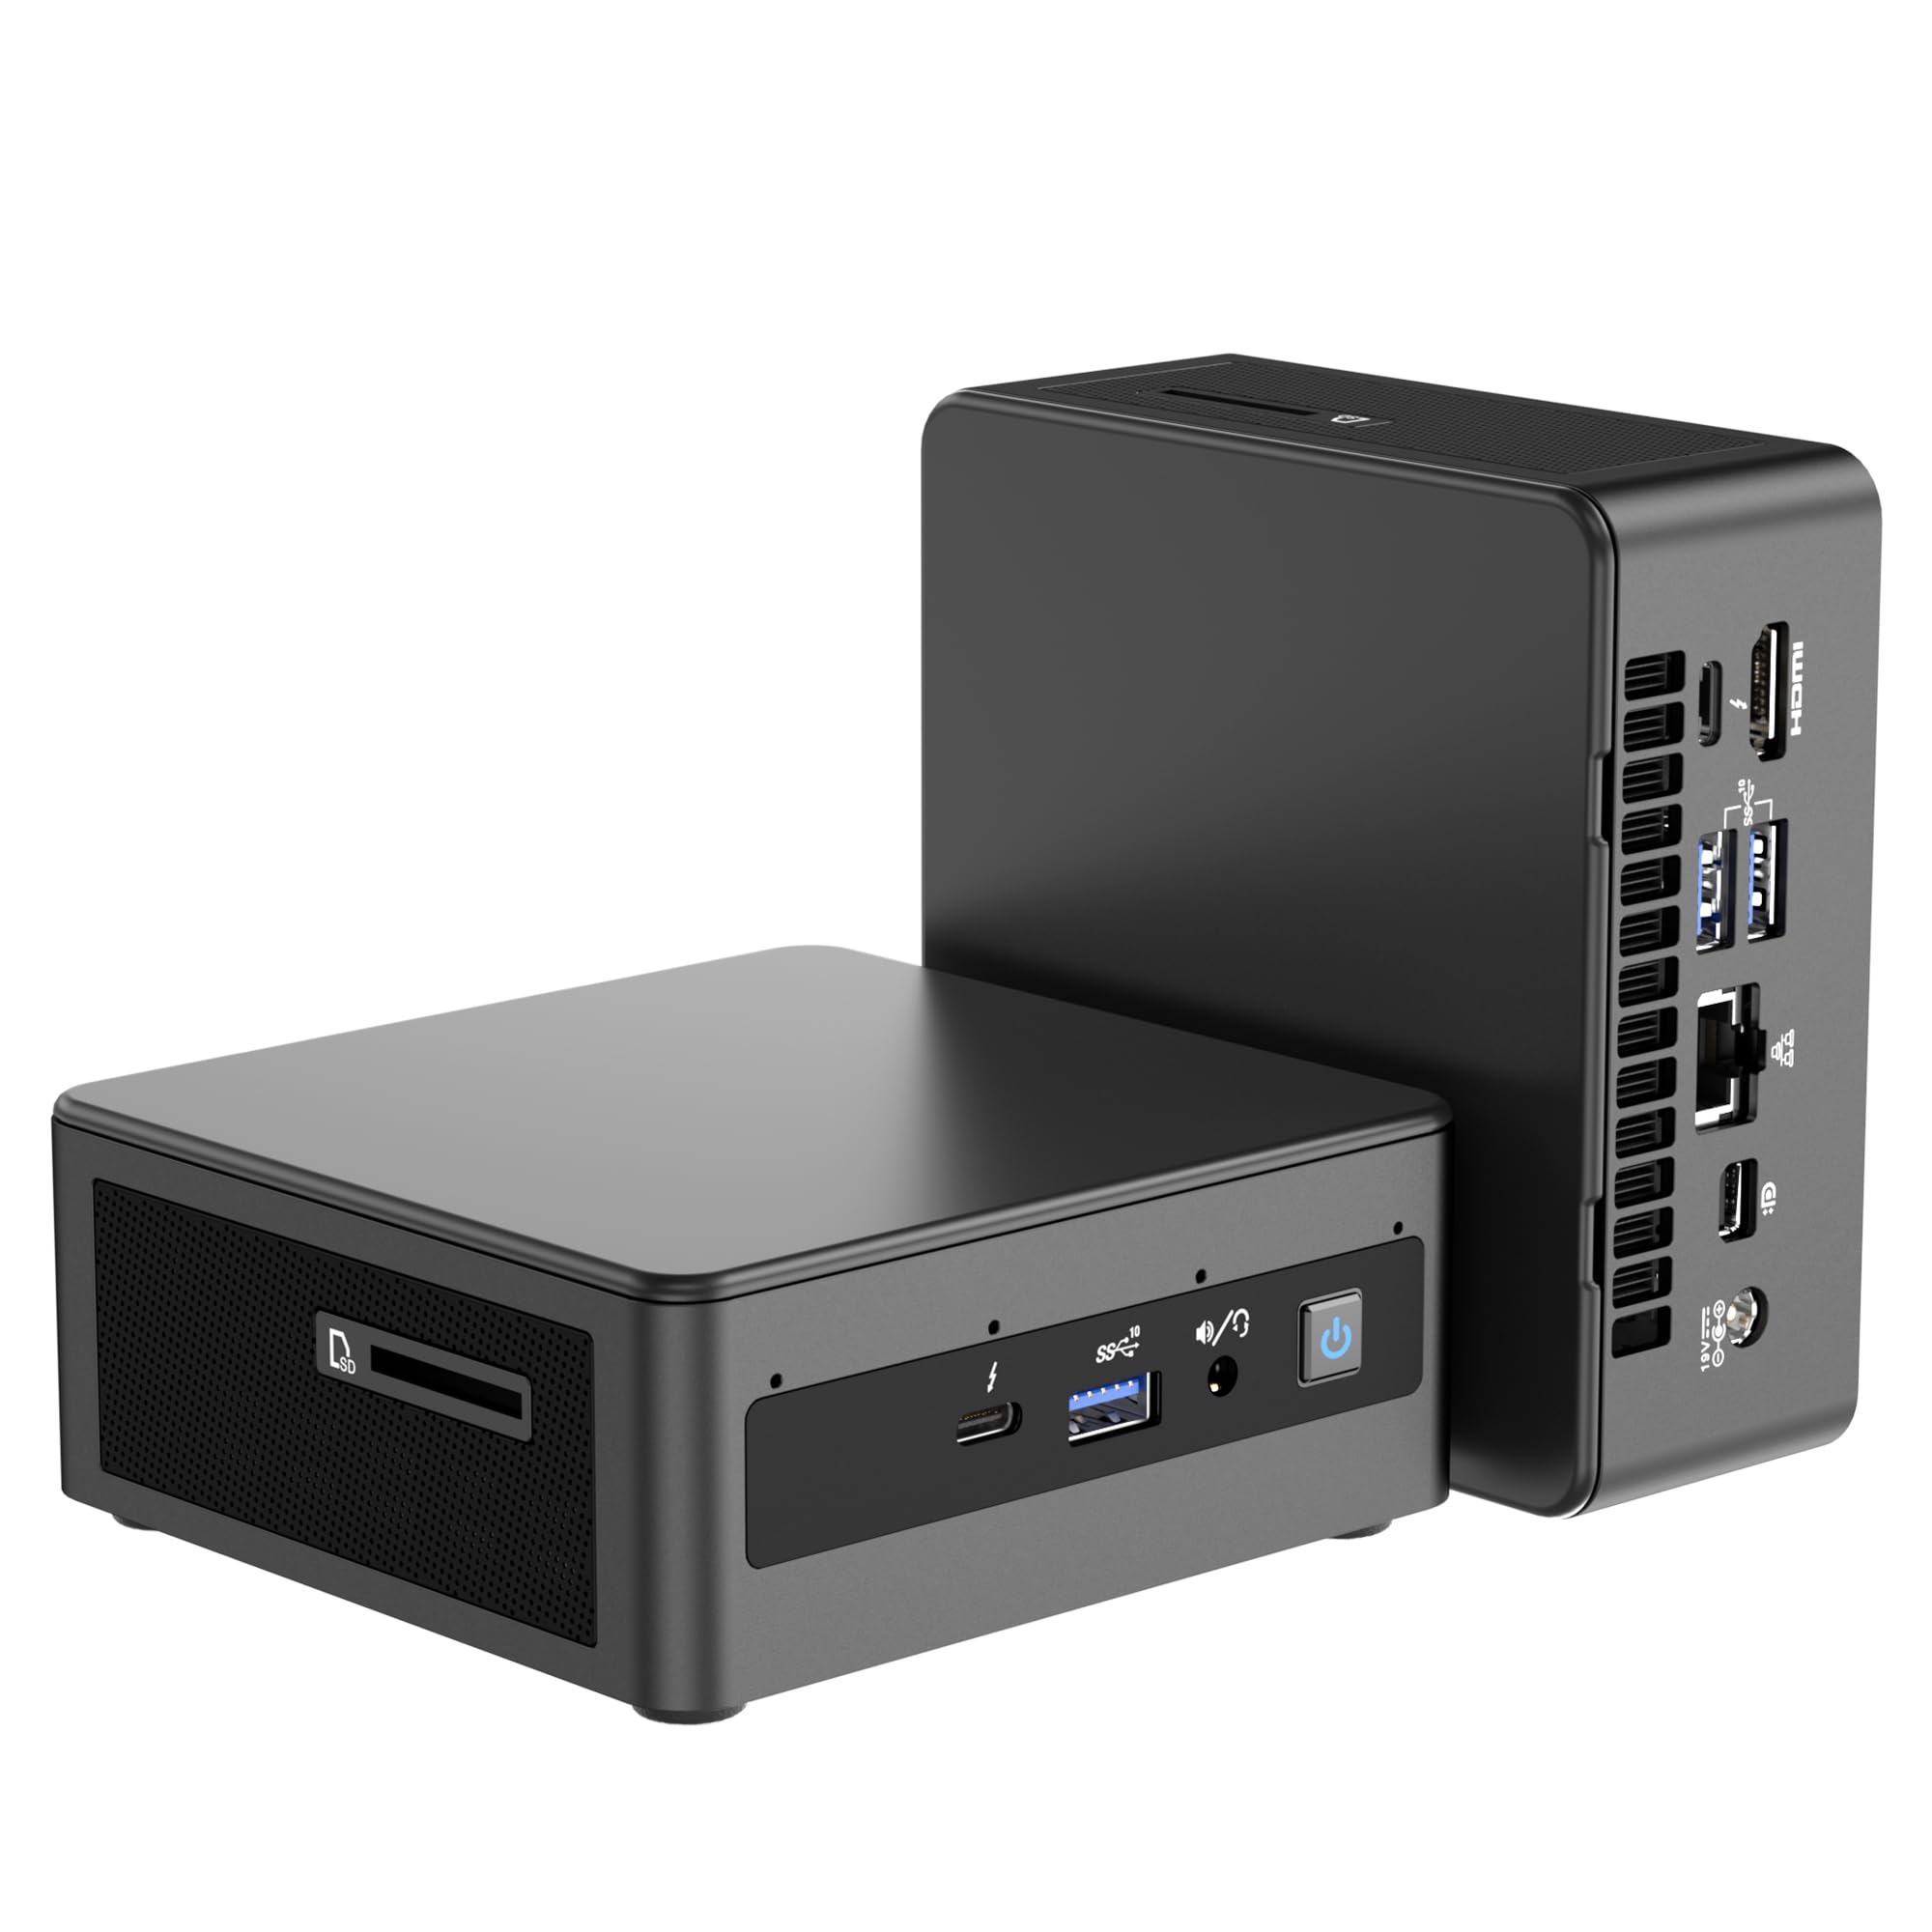 Intel nuc 11 Pro Kit ミニpc 第11世代 Intel Core i7-1165G7 16GB DDR4 512GB SSD M.2 NVMe PCle4.0 4コア 8スレッド 12 MB キャッシュ（2.8-4.7GHz） Wi